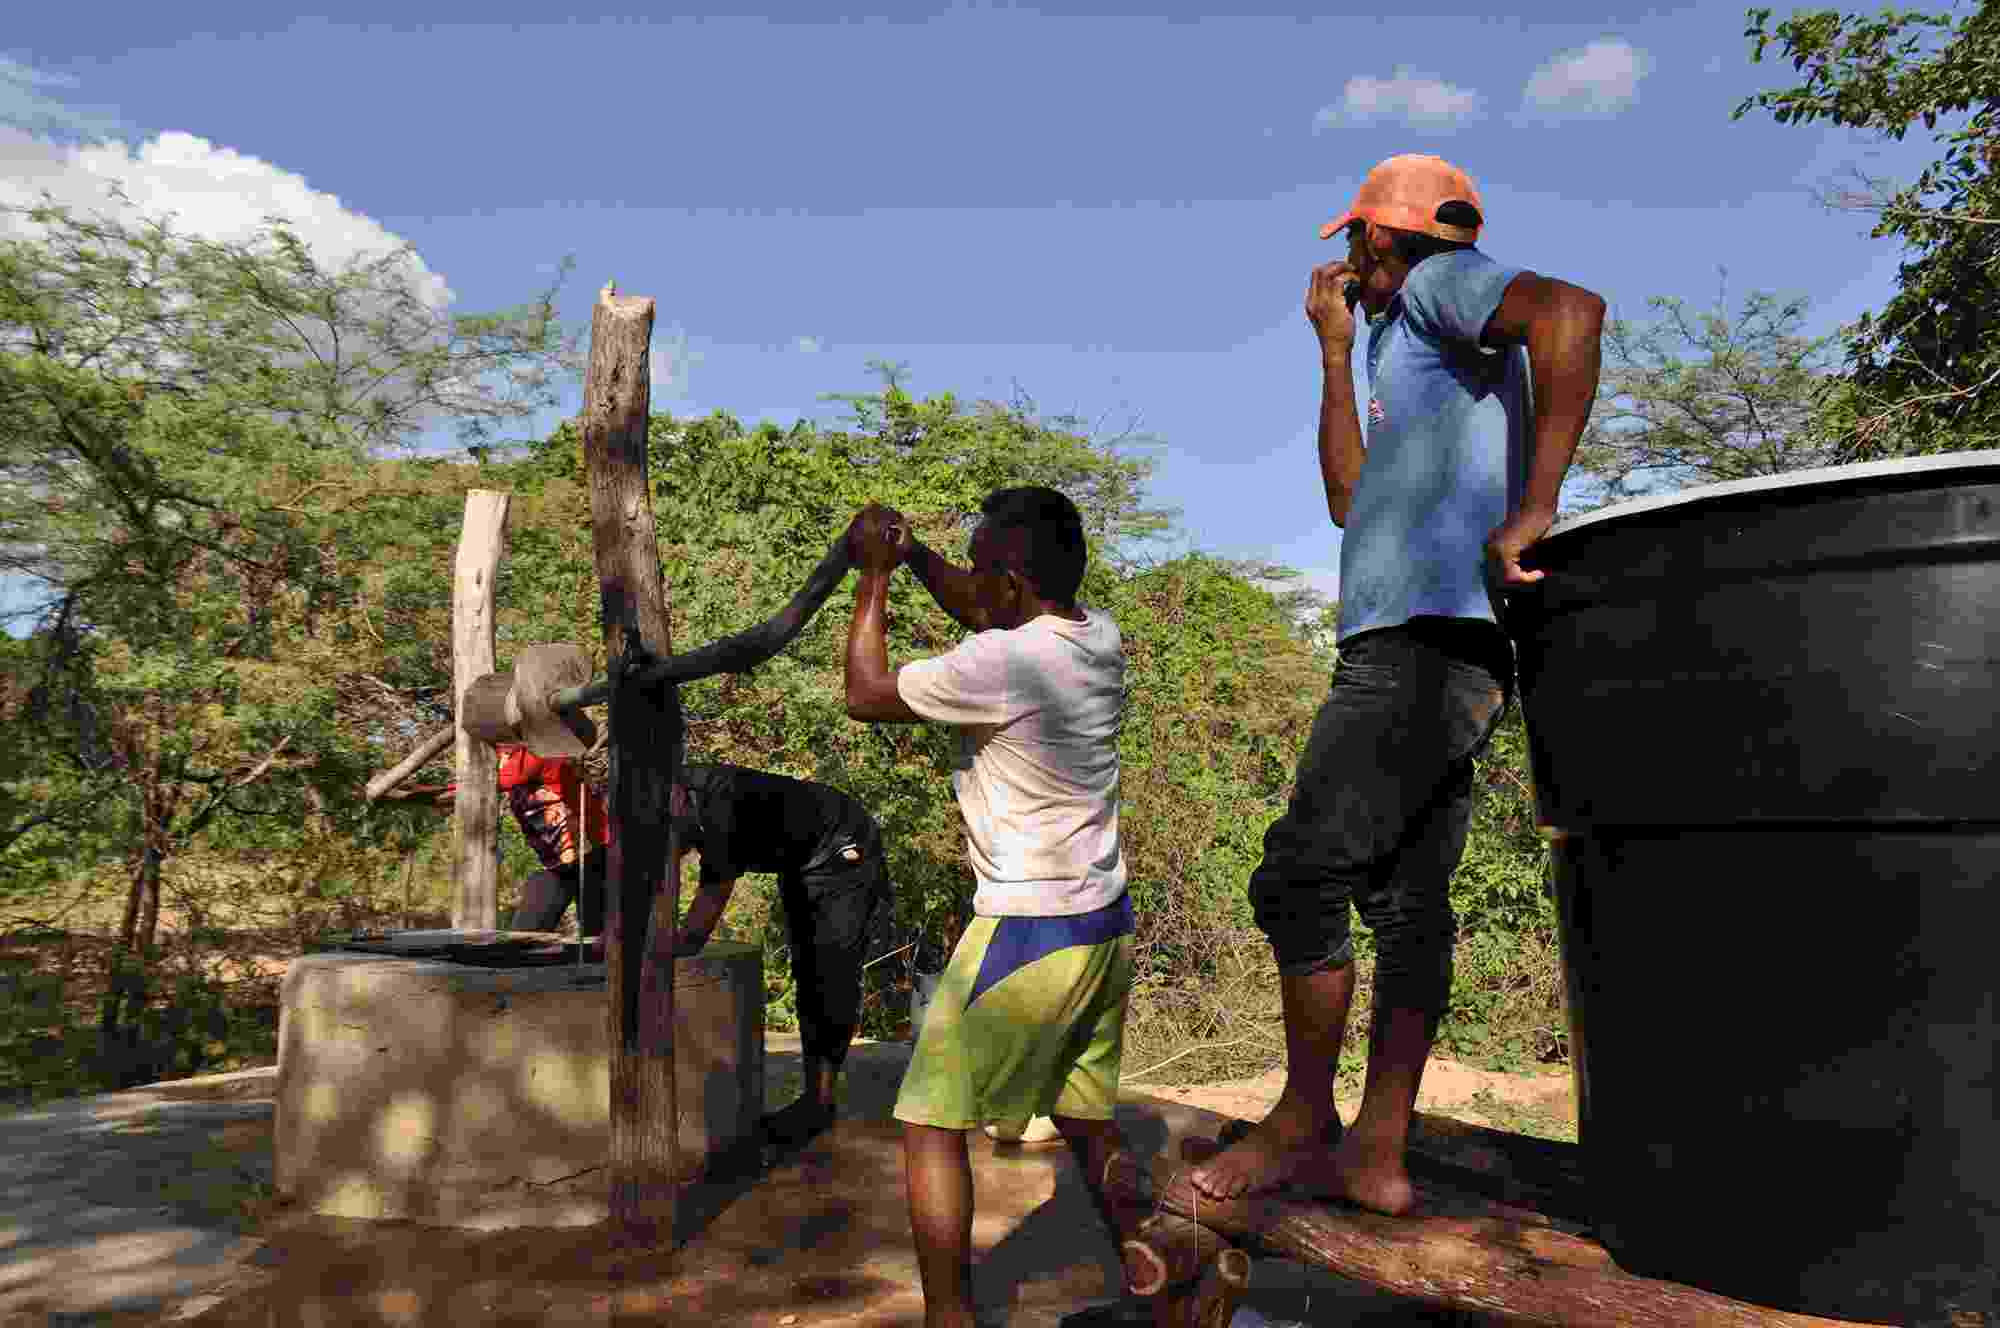 Wayuú community members using a water well with a wooden handle to access clean drinking water, La Guajira, Colombia